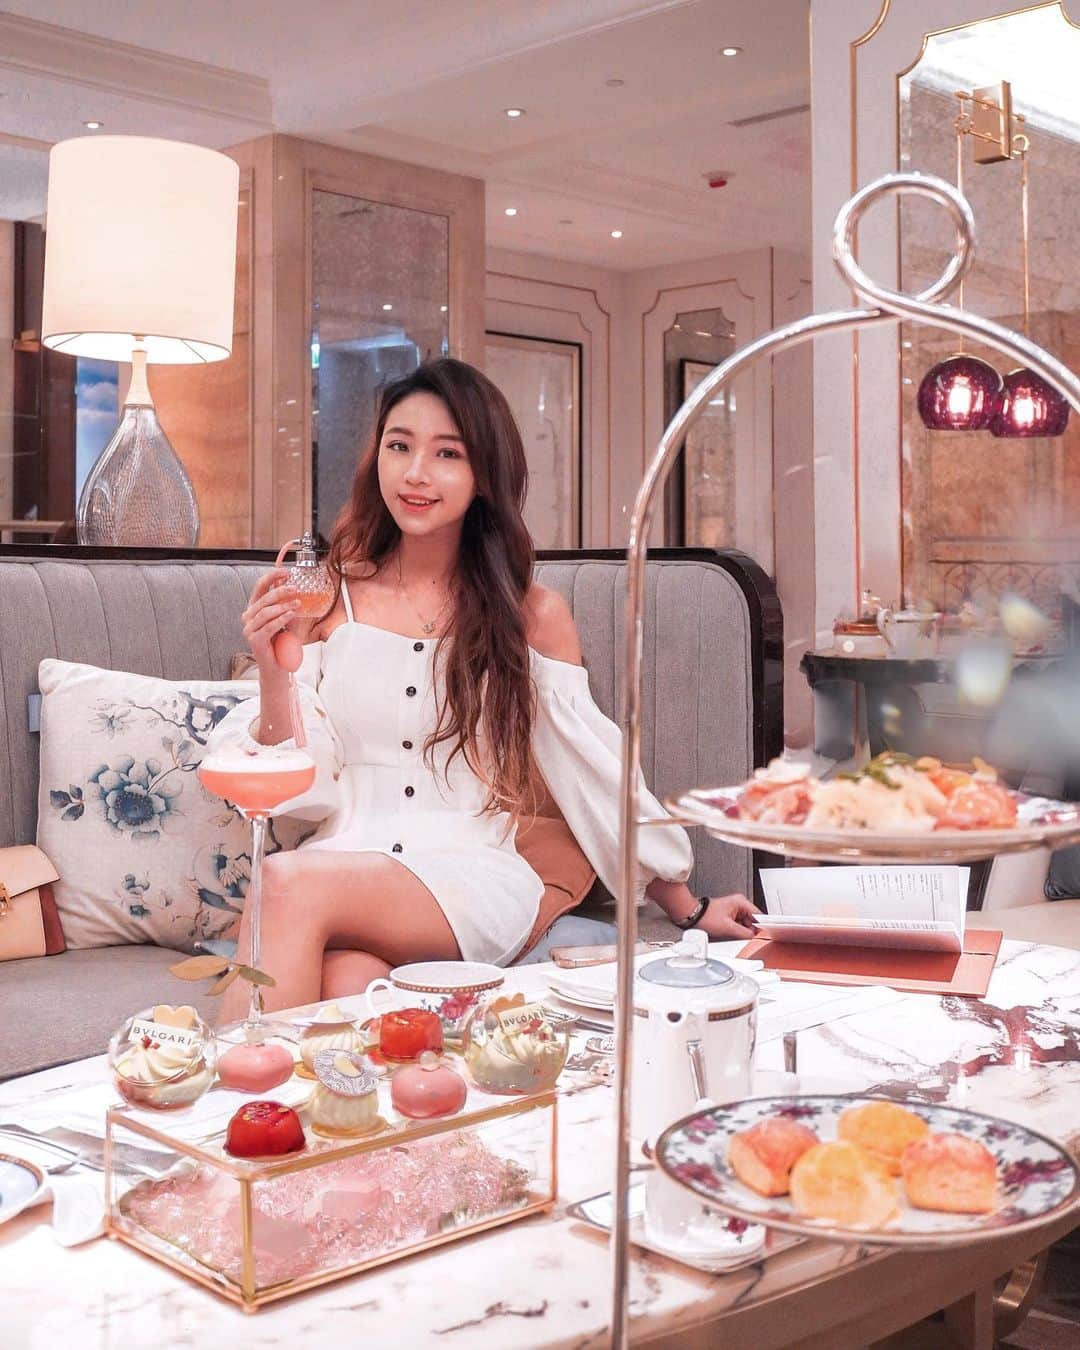 Moanna S.のインスタグラム：「Inspired by the limited edition @BVLGARI Rose Goldea🌹, @langhamhk has curated a stunning afternoon tea that showcases the joyful hues of BVLGARI’s existing brand codes and the hotel’s sweetest shades of pink!  Wardrobe: @thealica_   #LanghamStaycstion #langhamhk #LovingLangham」